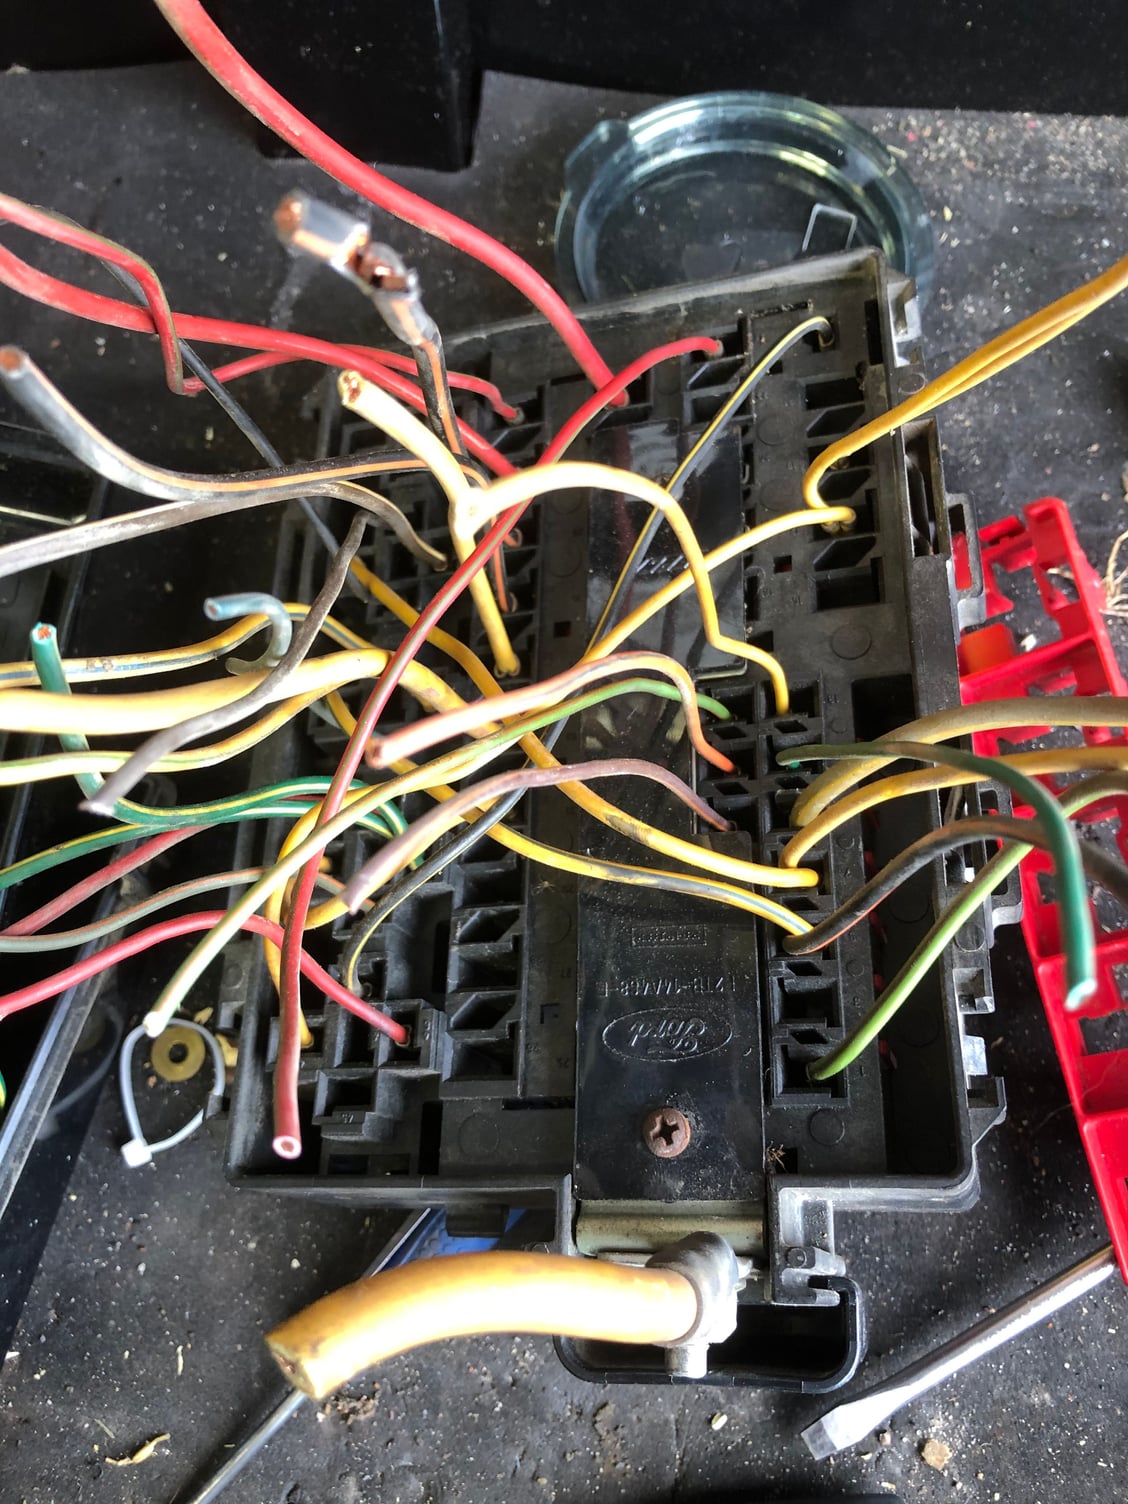 Fuse box end connections. - Ford Truck Enthusiasts Forums